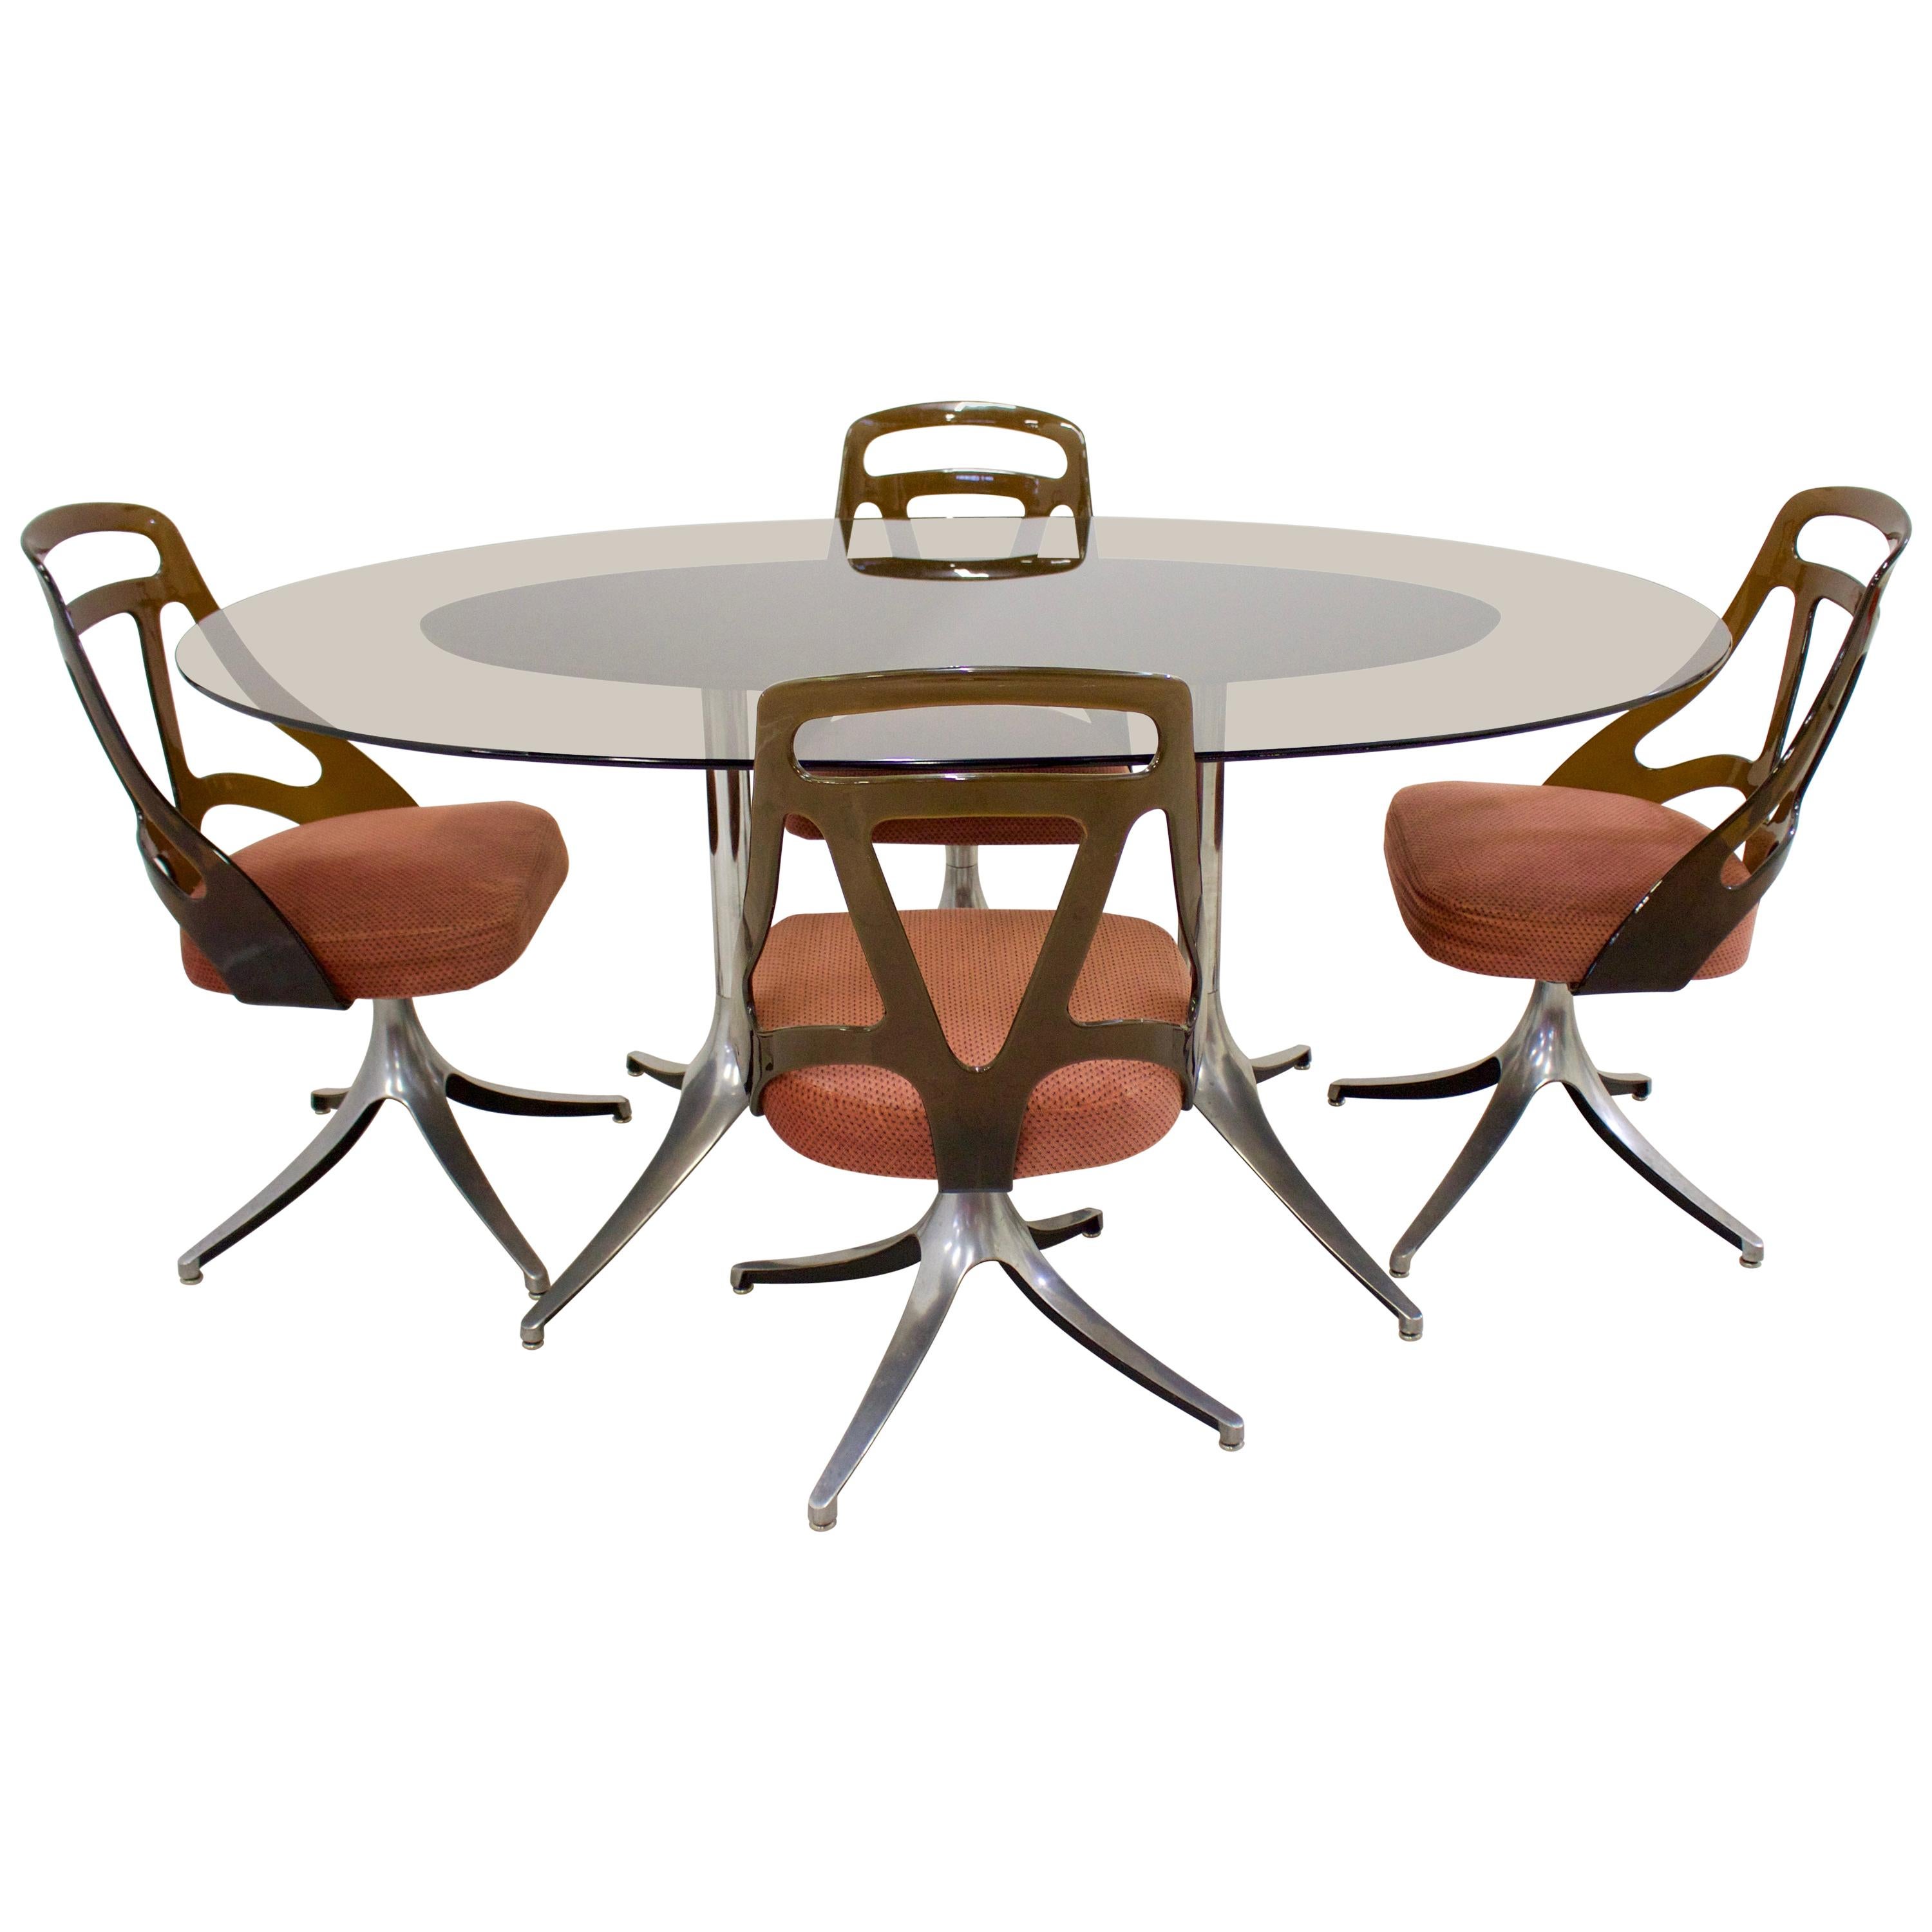 Midcentury Italian Glass Dining Table and Chairs Set of 4, 1960s For Sale